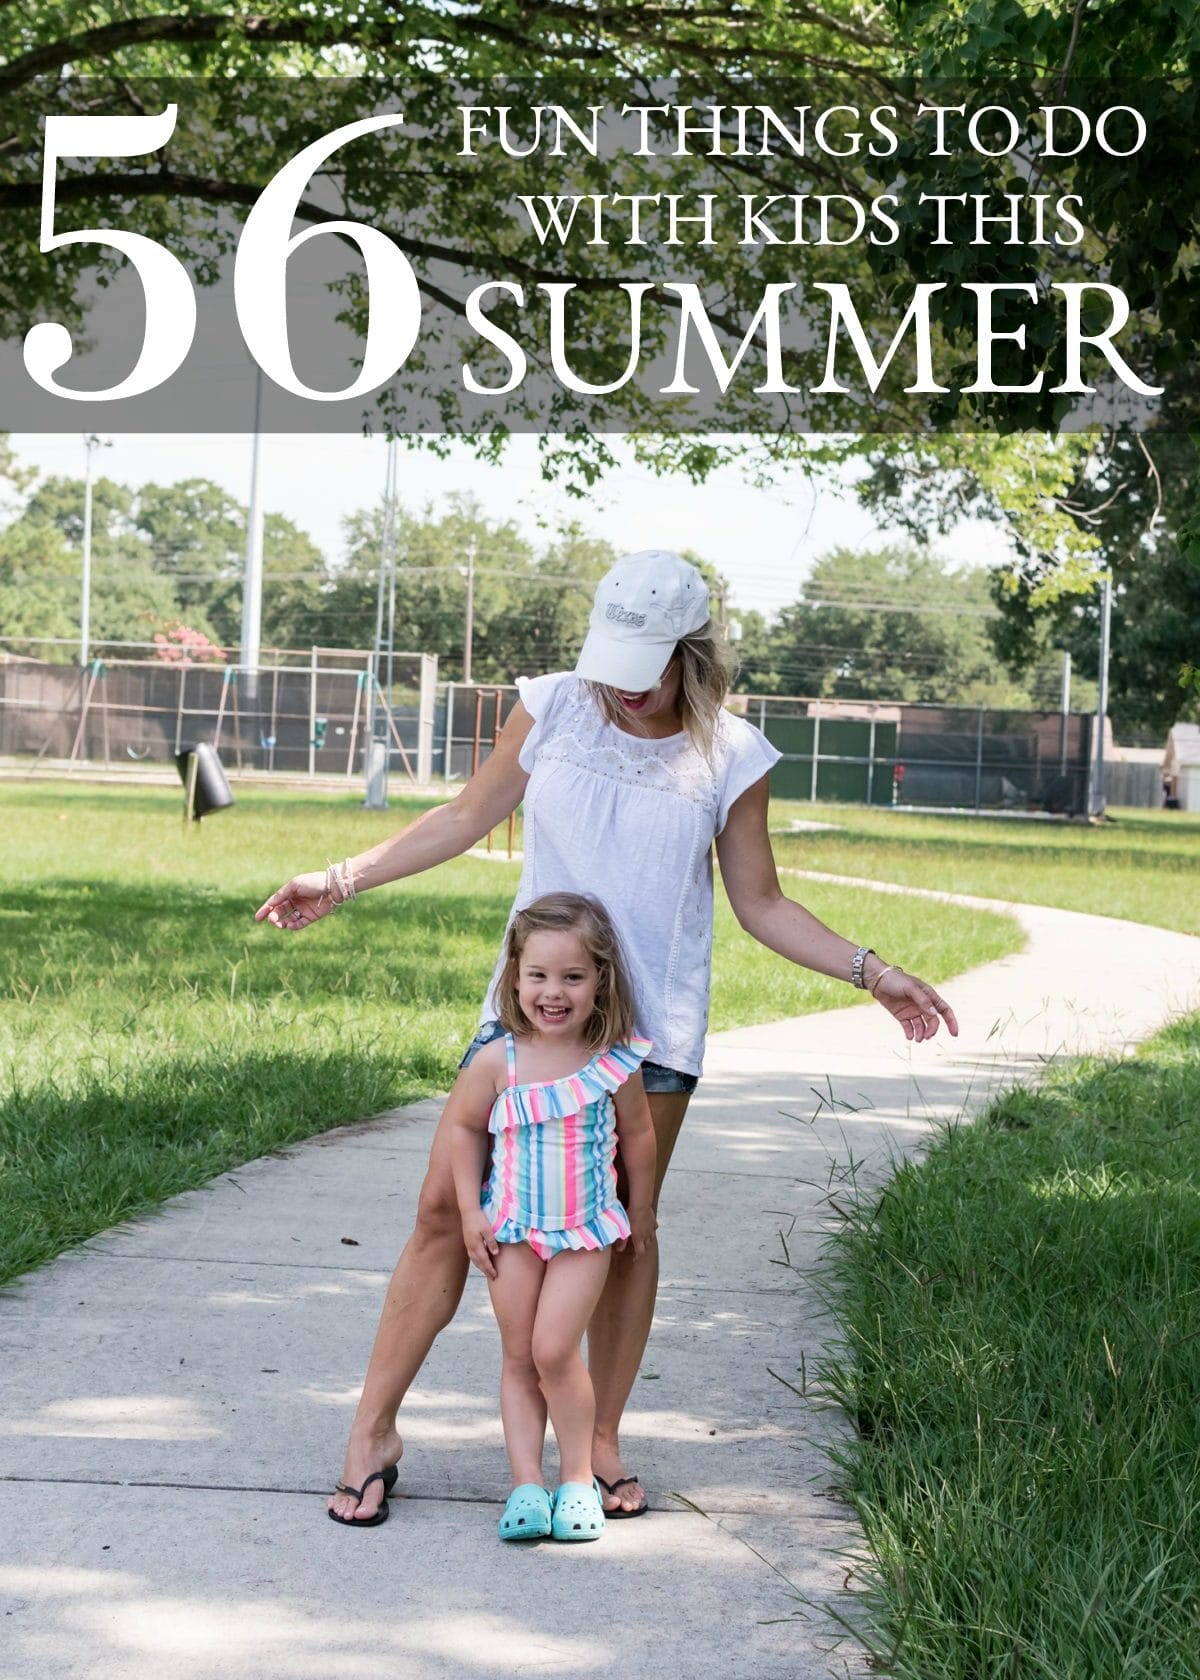 56 Fun Things to Do with Kids this Summer